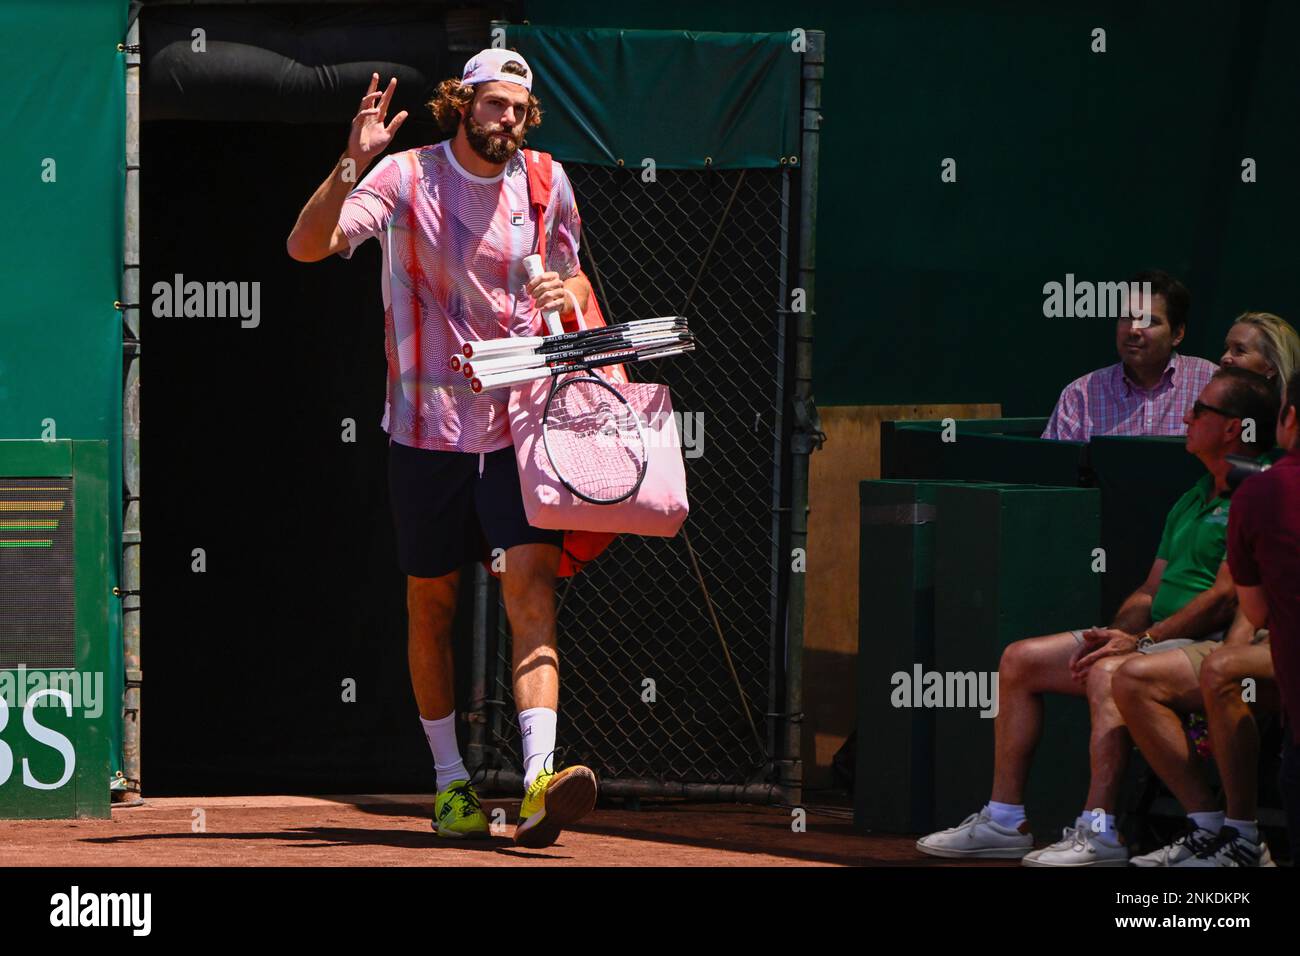 HOUSTON, TX - APRIL 09: Reilly Opelka (USA) enters the court before the US  Clay Court Championships semifinal singles match at River Oaks Country Club  on April 9, 2022 in Houston, TX. (